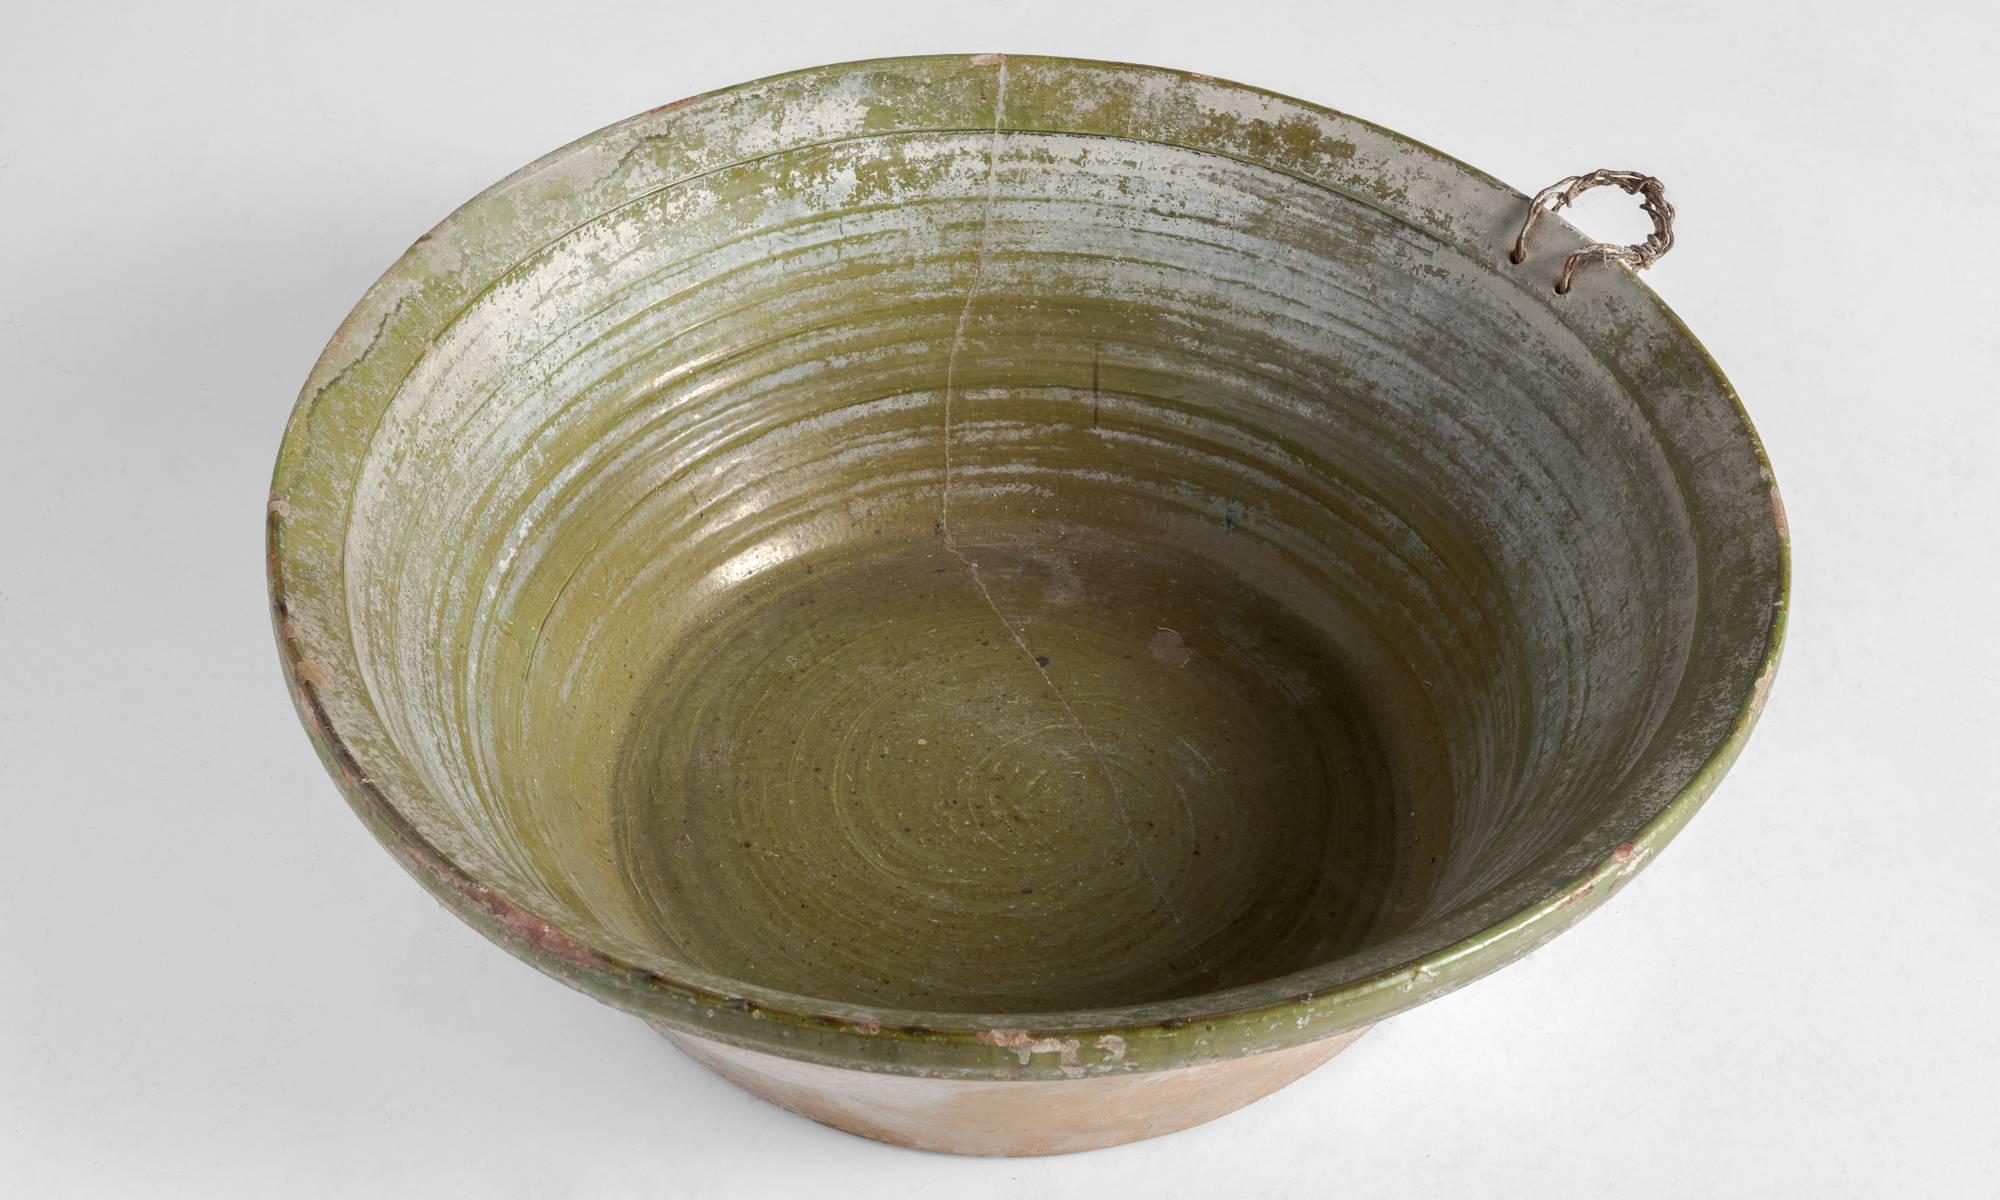 Green Terracotta bowl, Spain, circa 1950.

Large-scale handmade terracotta bowl with beautiful color.

Measures: 28